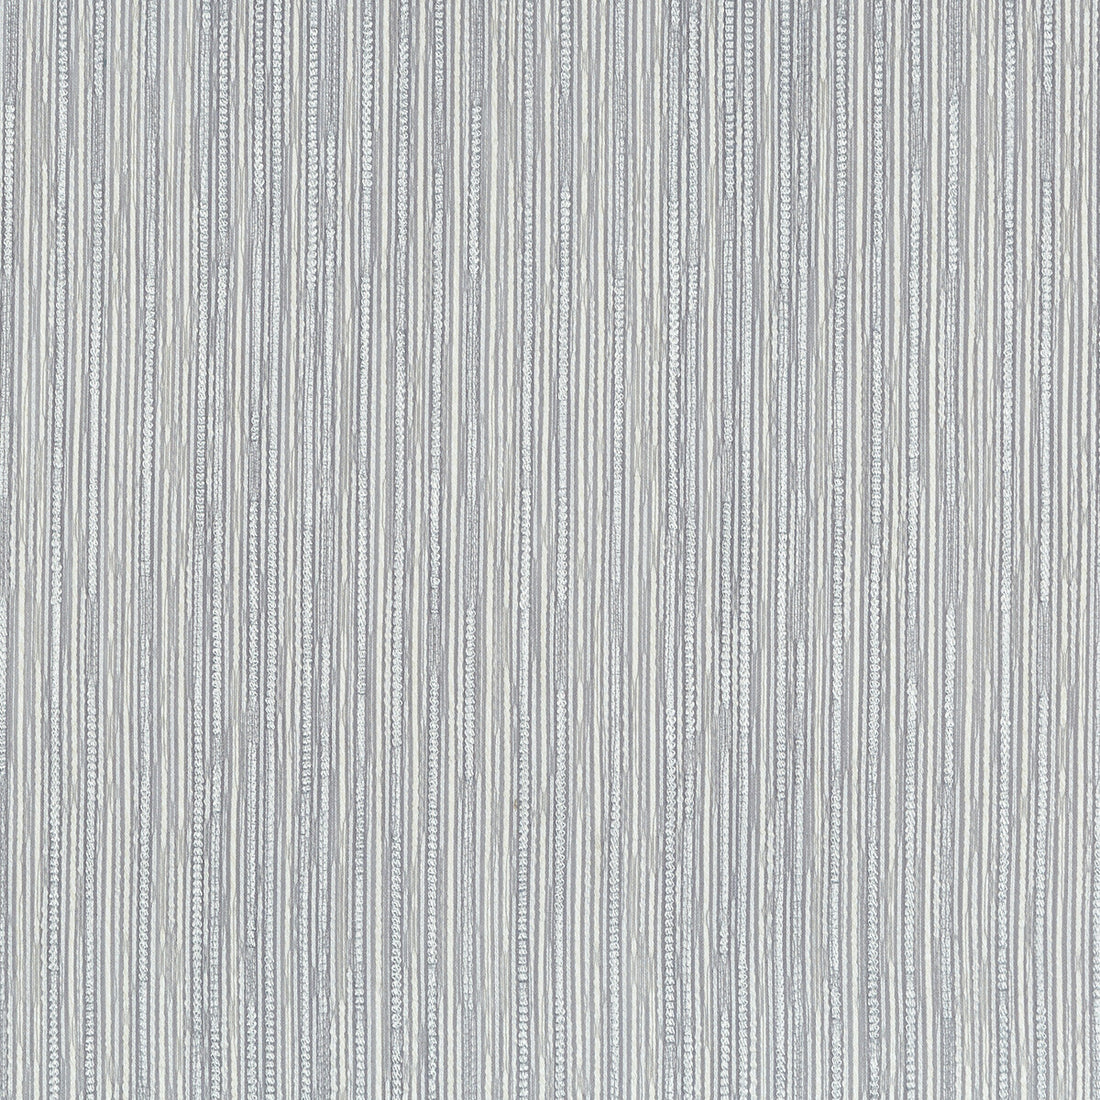 Drifting fabric in gray pearl color - pattern 4782.11.0 - by Kravet Contract in the Kravet Cruise collection